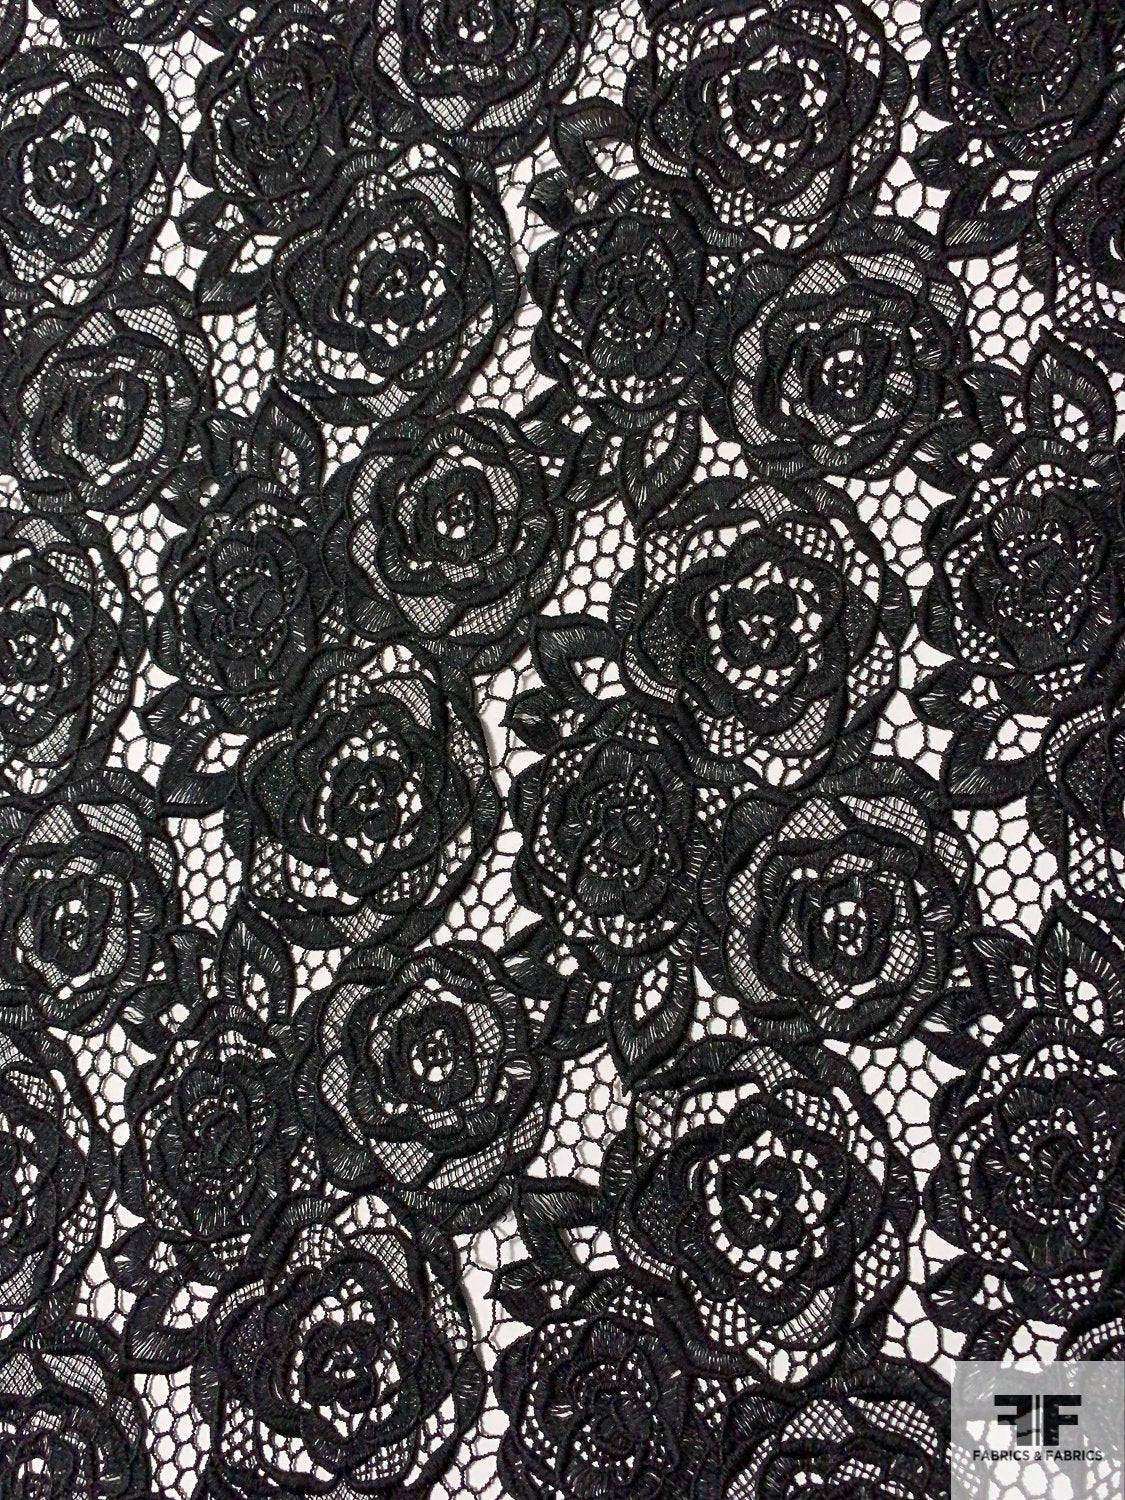 Black Lace Fabric, Crocheted Lace Fabric, Guipure Lace Fabric, Lace Fabric  With Floral and Leaves -  Canada